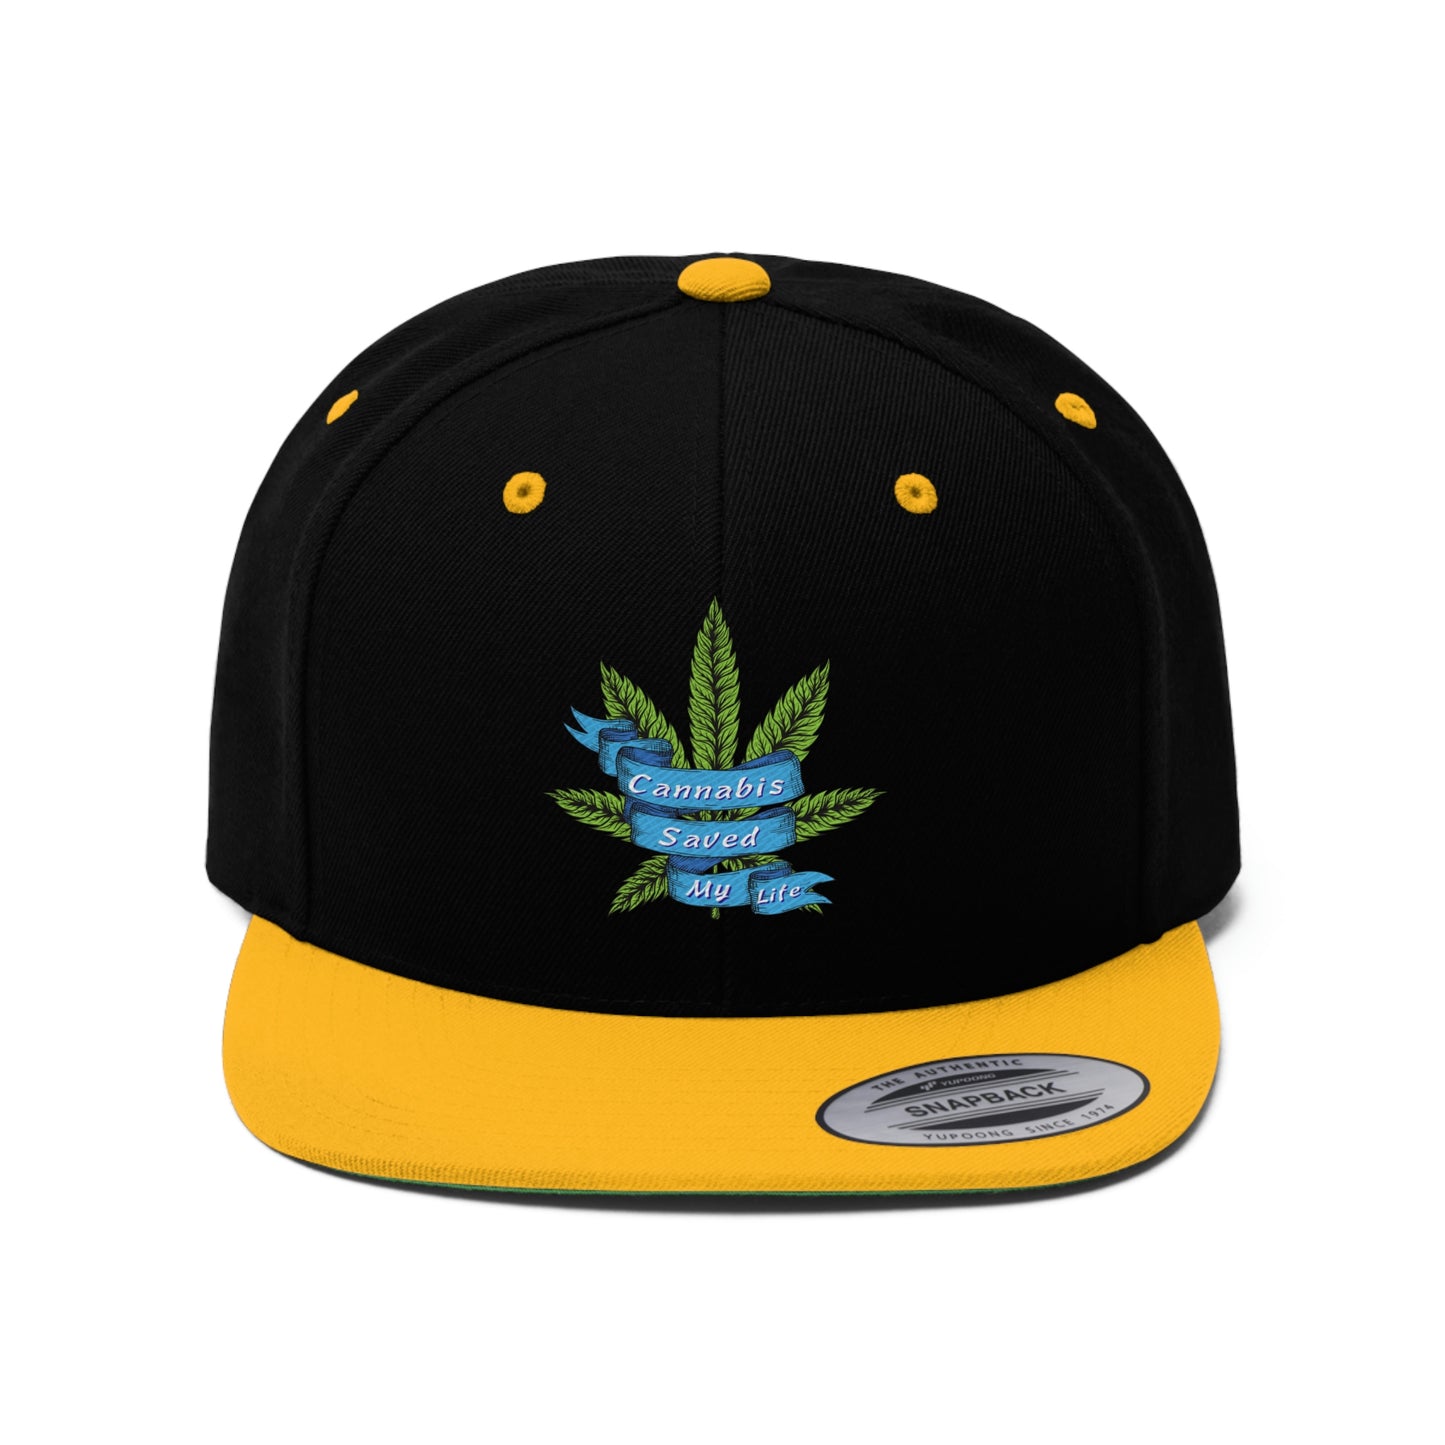 Close up of the black and gold Cannabis Saved my Life Snapback Hat with cannabis leaf